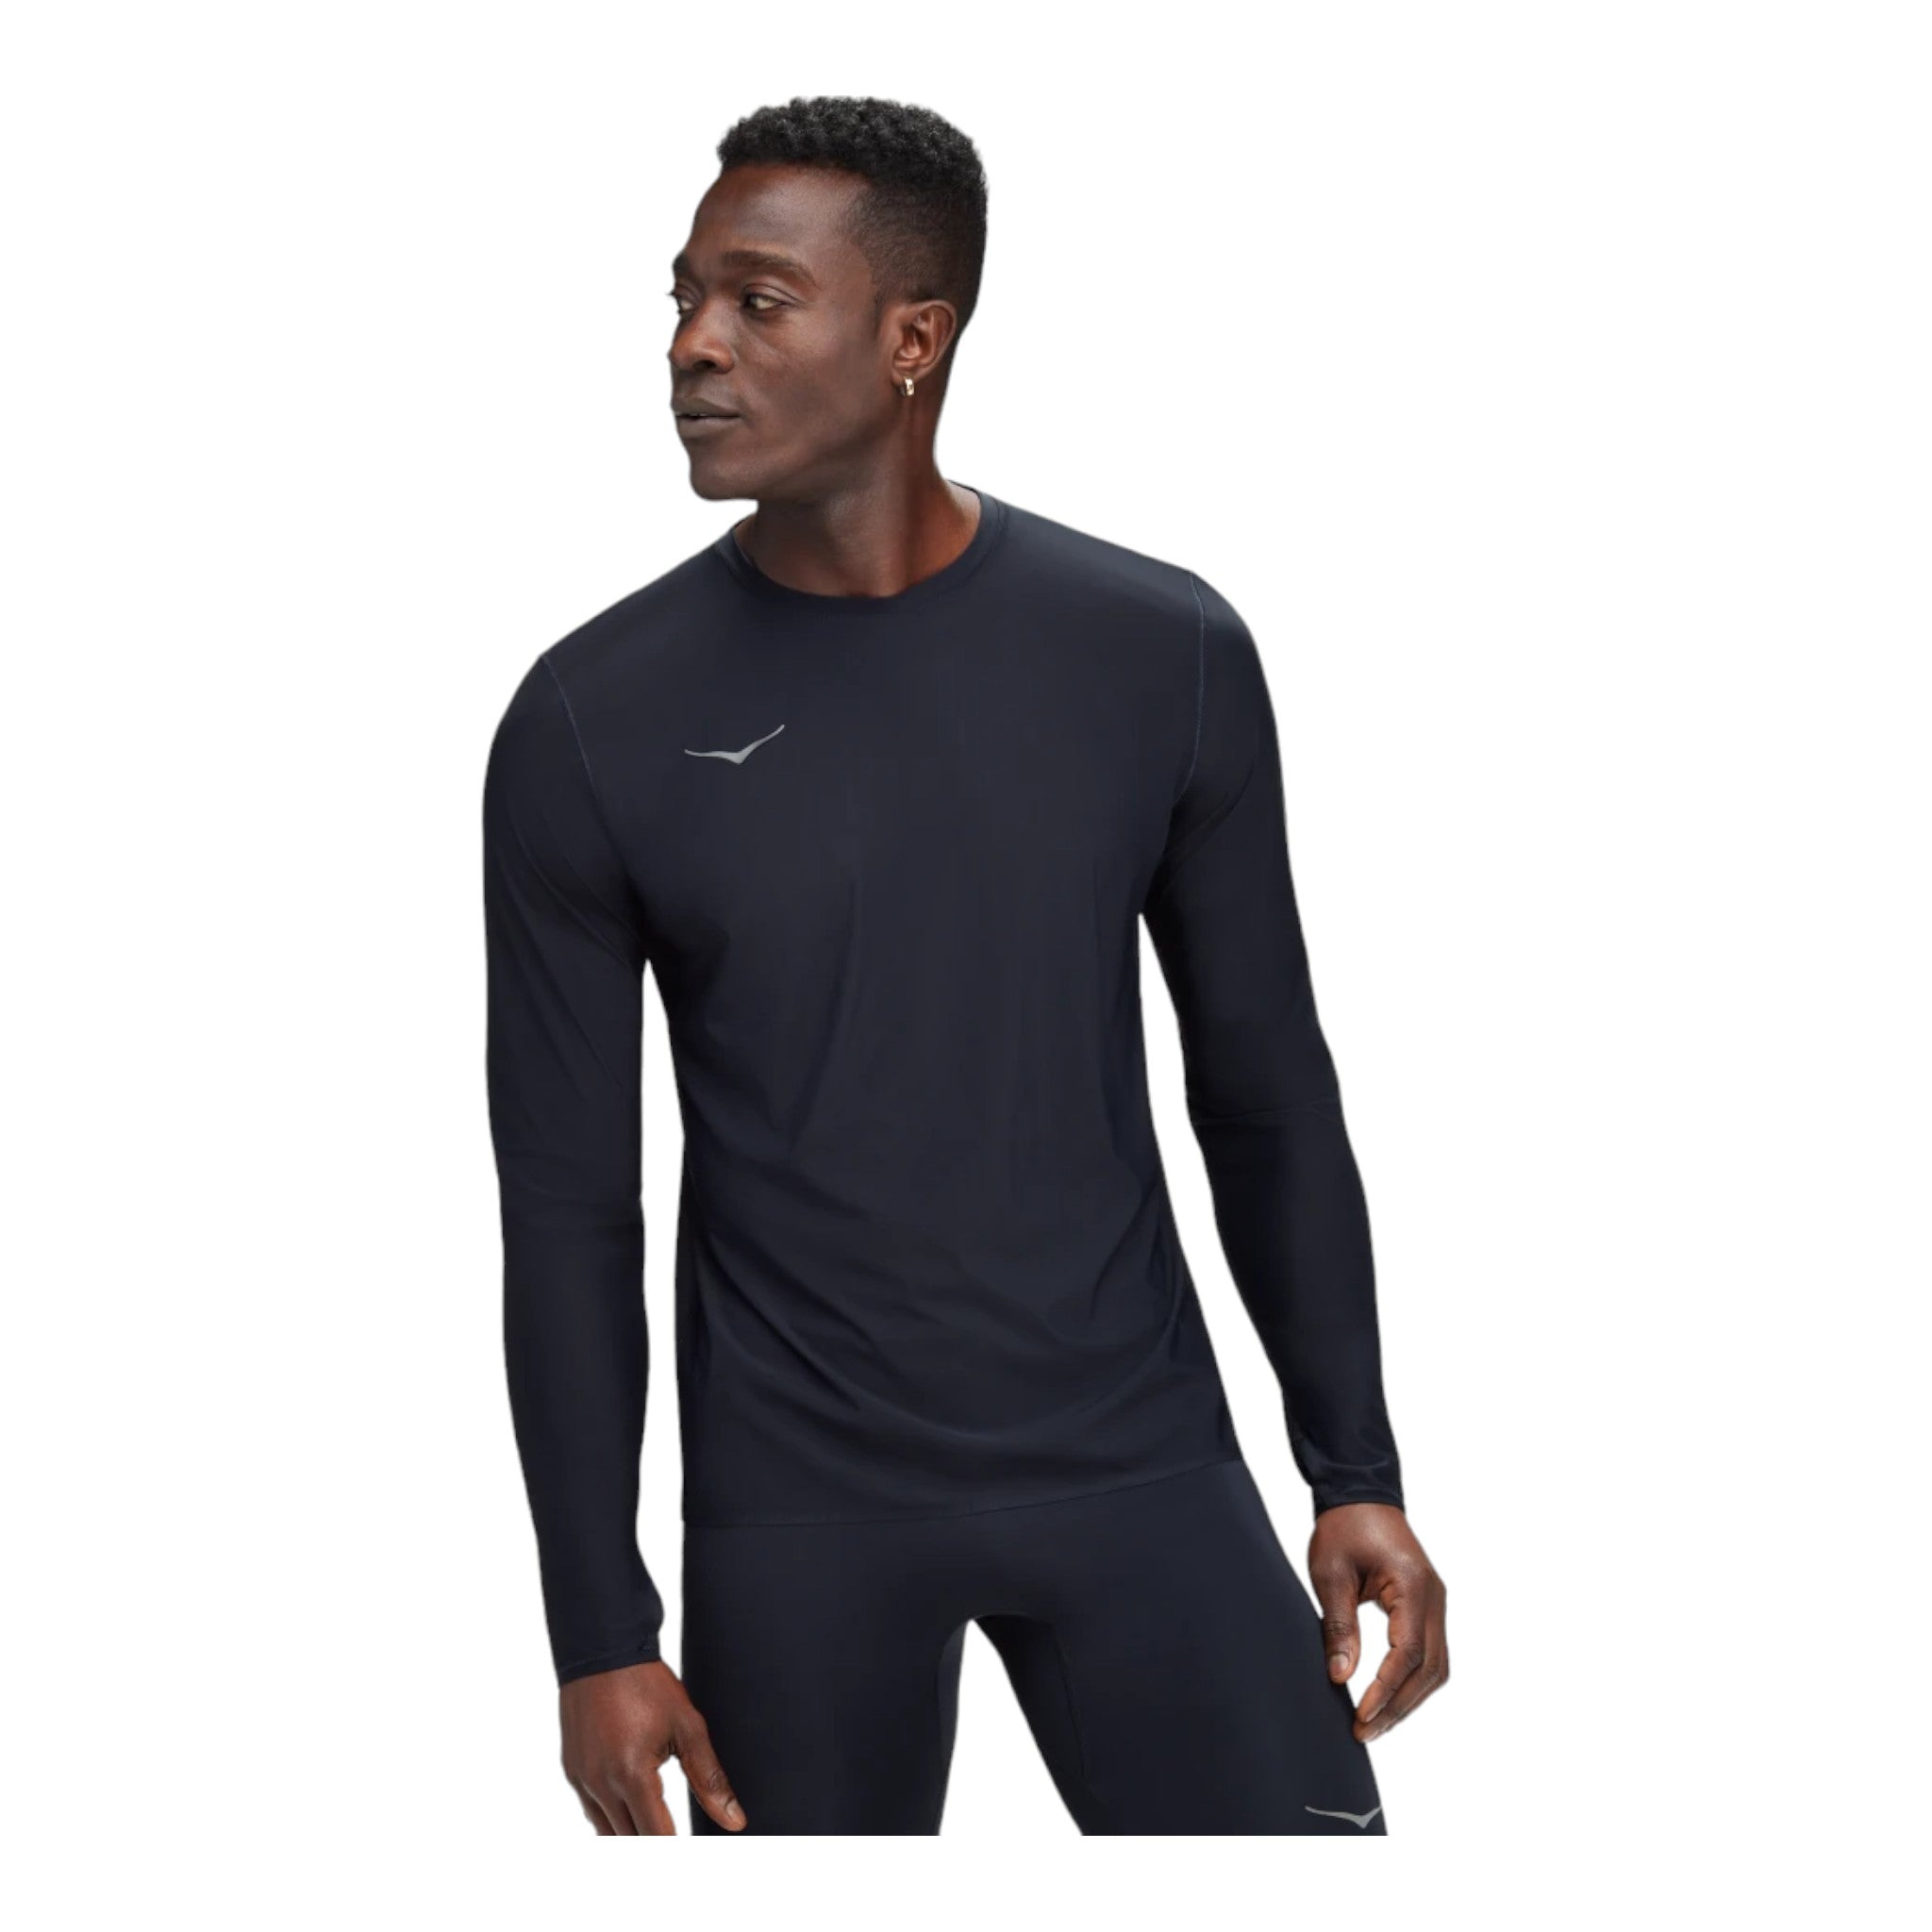 V-NECK)Men Sports Active Long Sleeve Shirt Quick Dry Gym Training Dry Dri  Fit Compression Shirt For Running Jogging Workout Clothes Sports Wear for  men rashguard for men